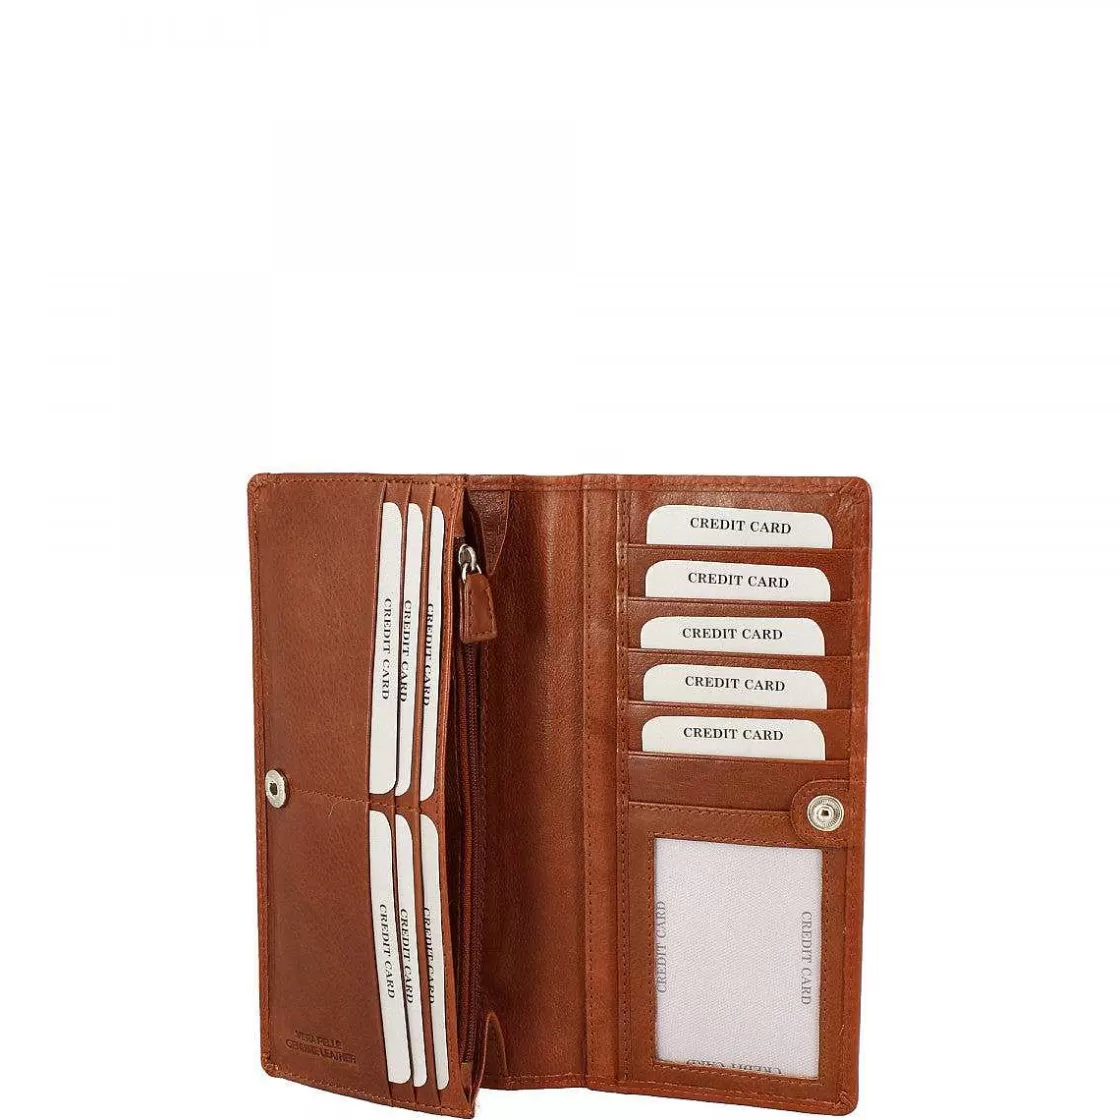 Leonardo Women'S Wallet Made Of Nappa Leather For Banknotes And Credit Cards In Various Colors Store